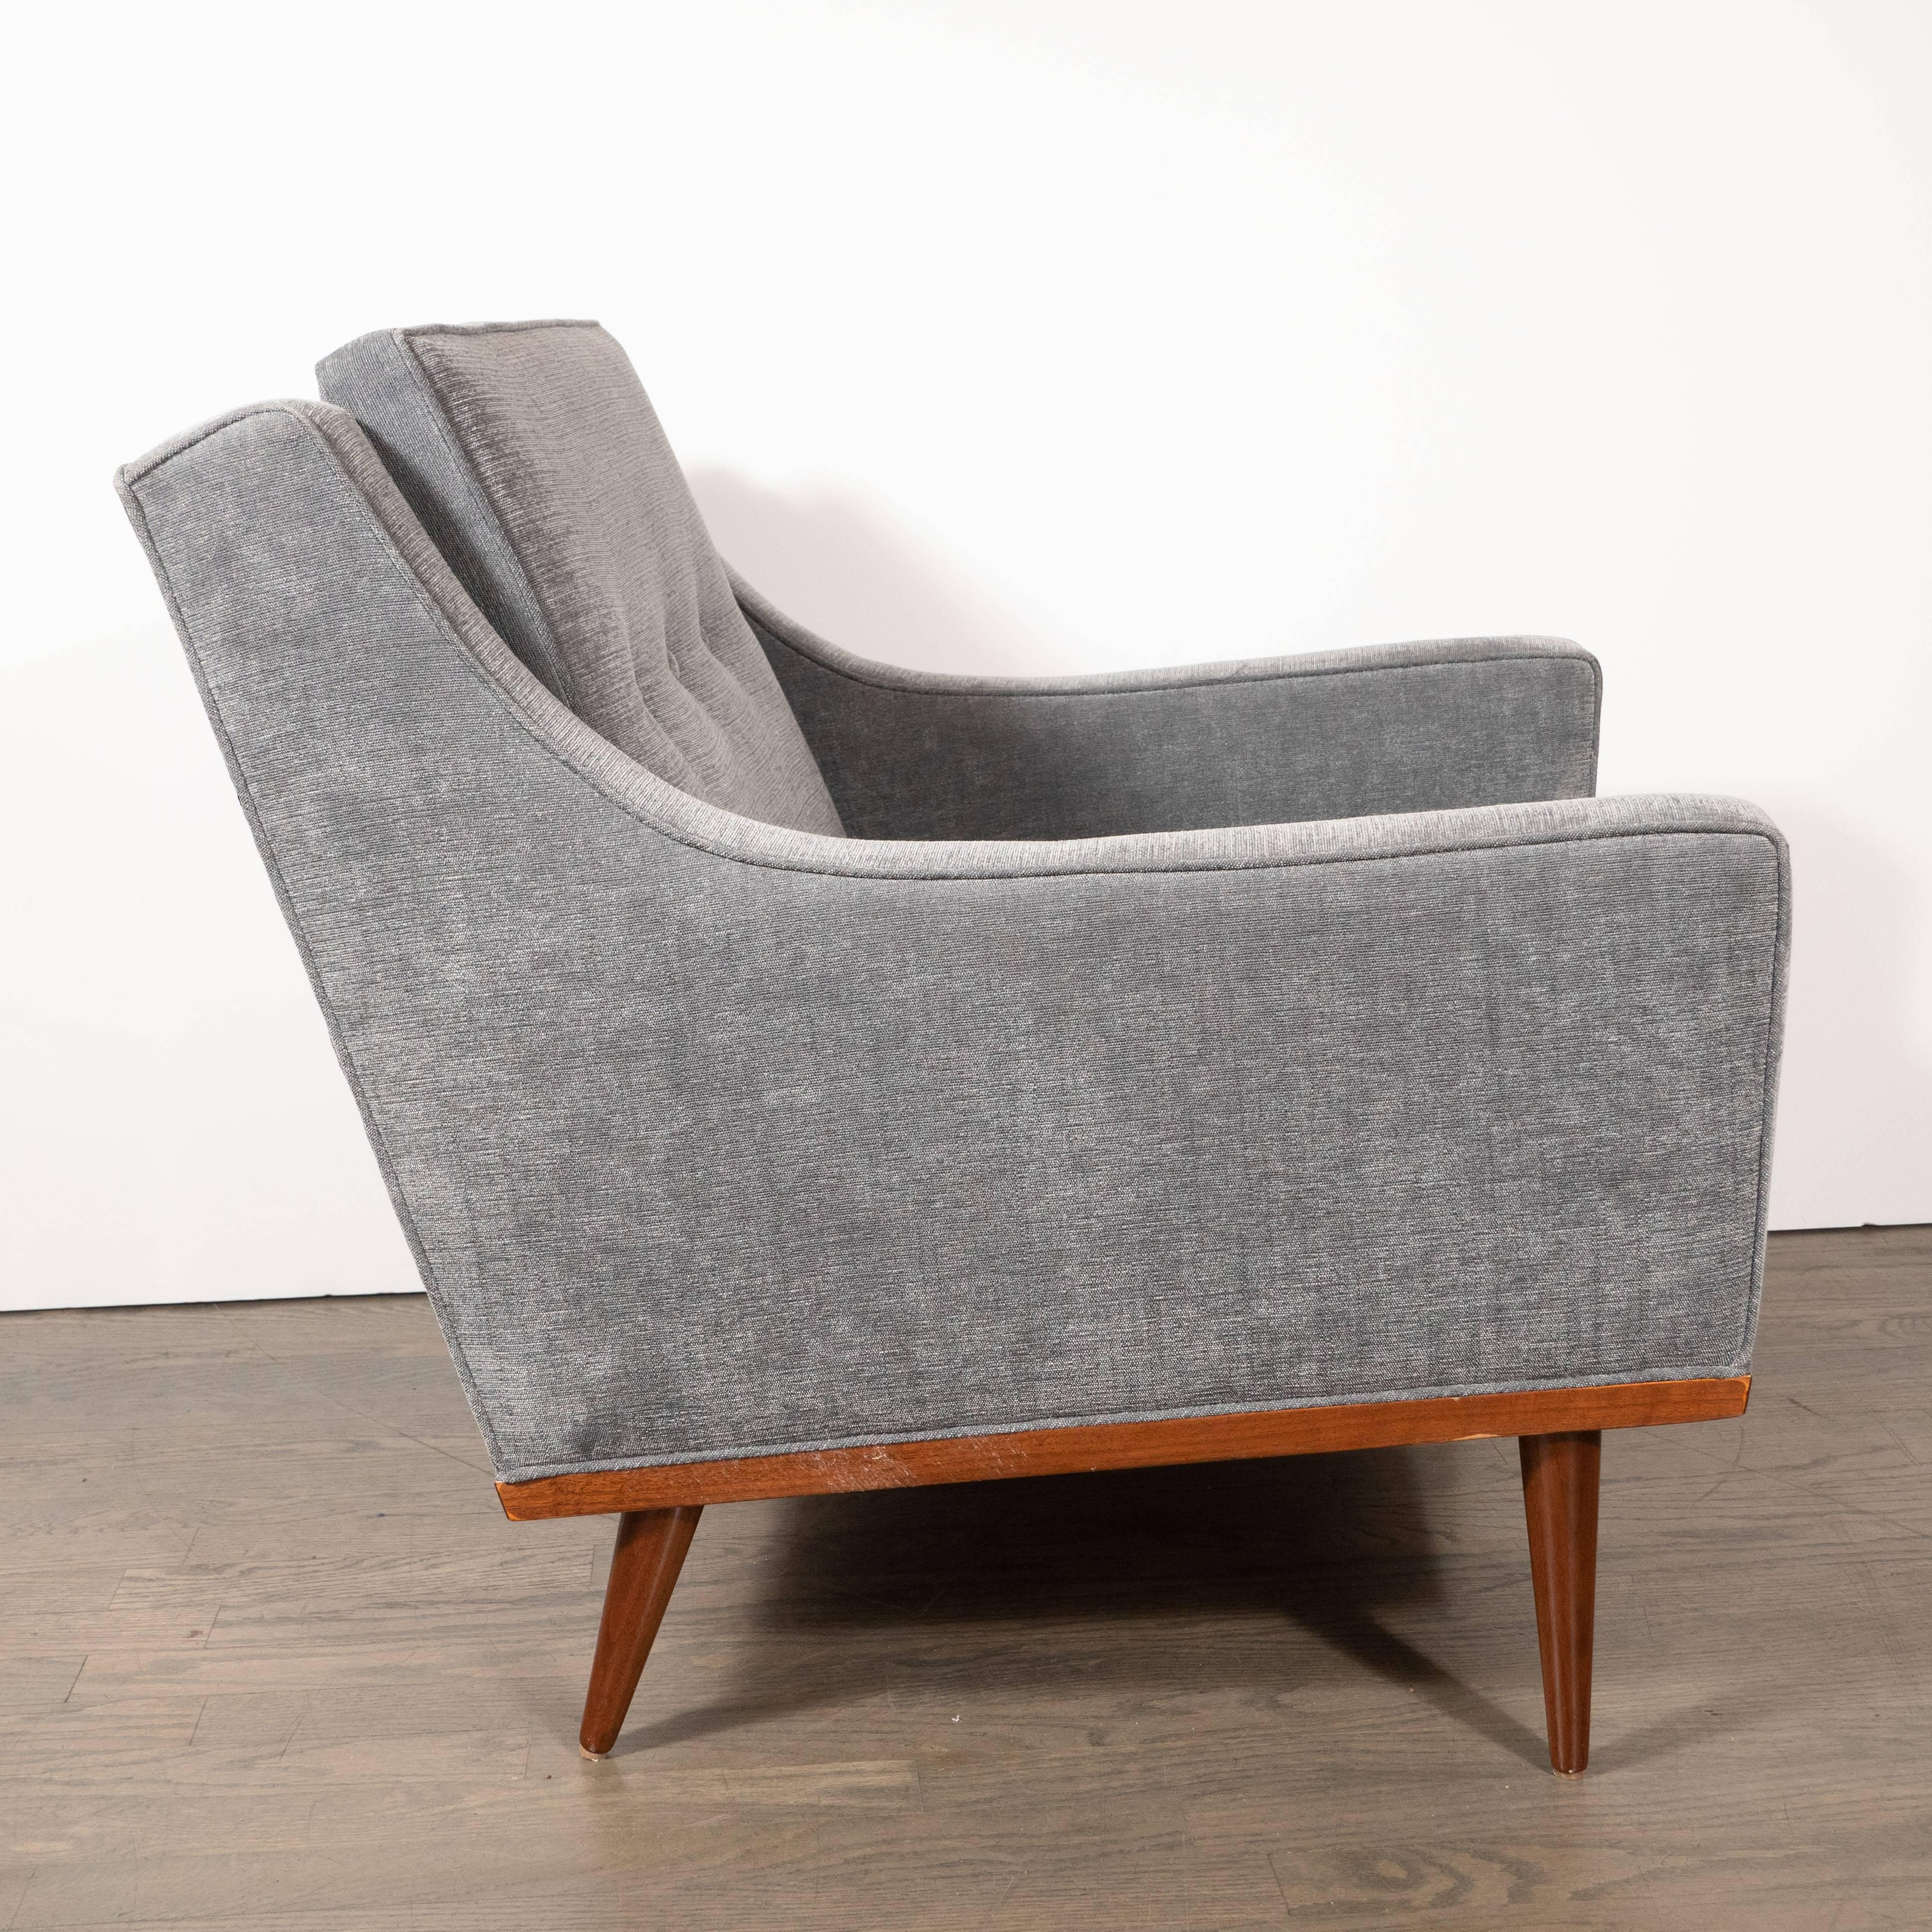 Mid-Century Modern Hand Rubbed Walnut Button Back Armchair in Dove Gray Fabric In Excellent Condition For Sale In New York, NY